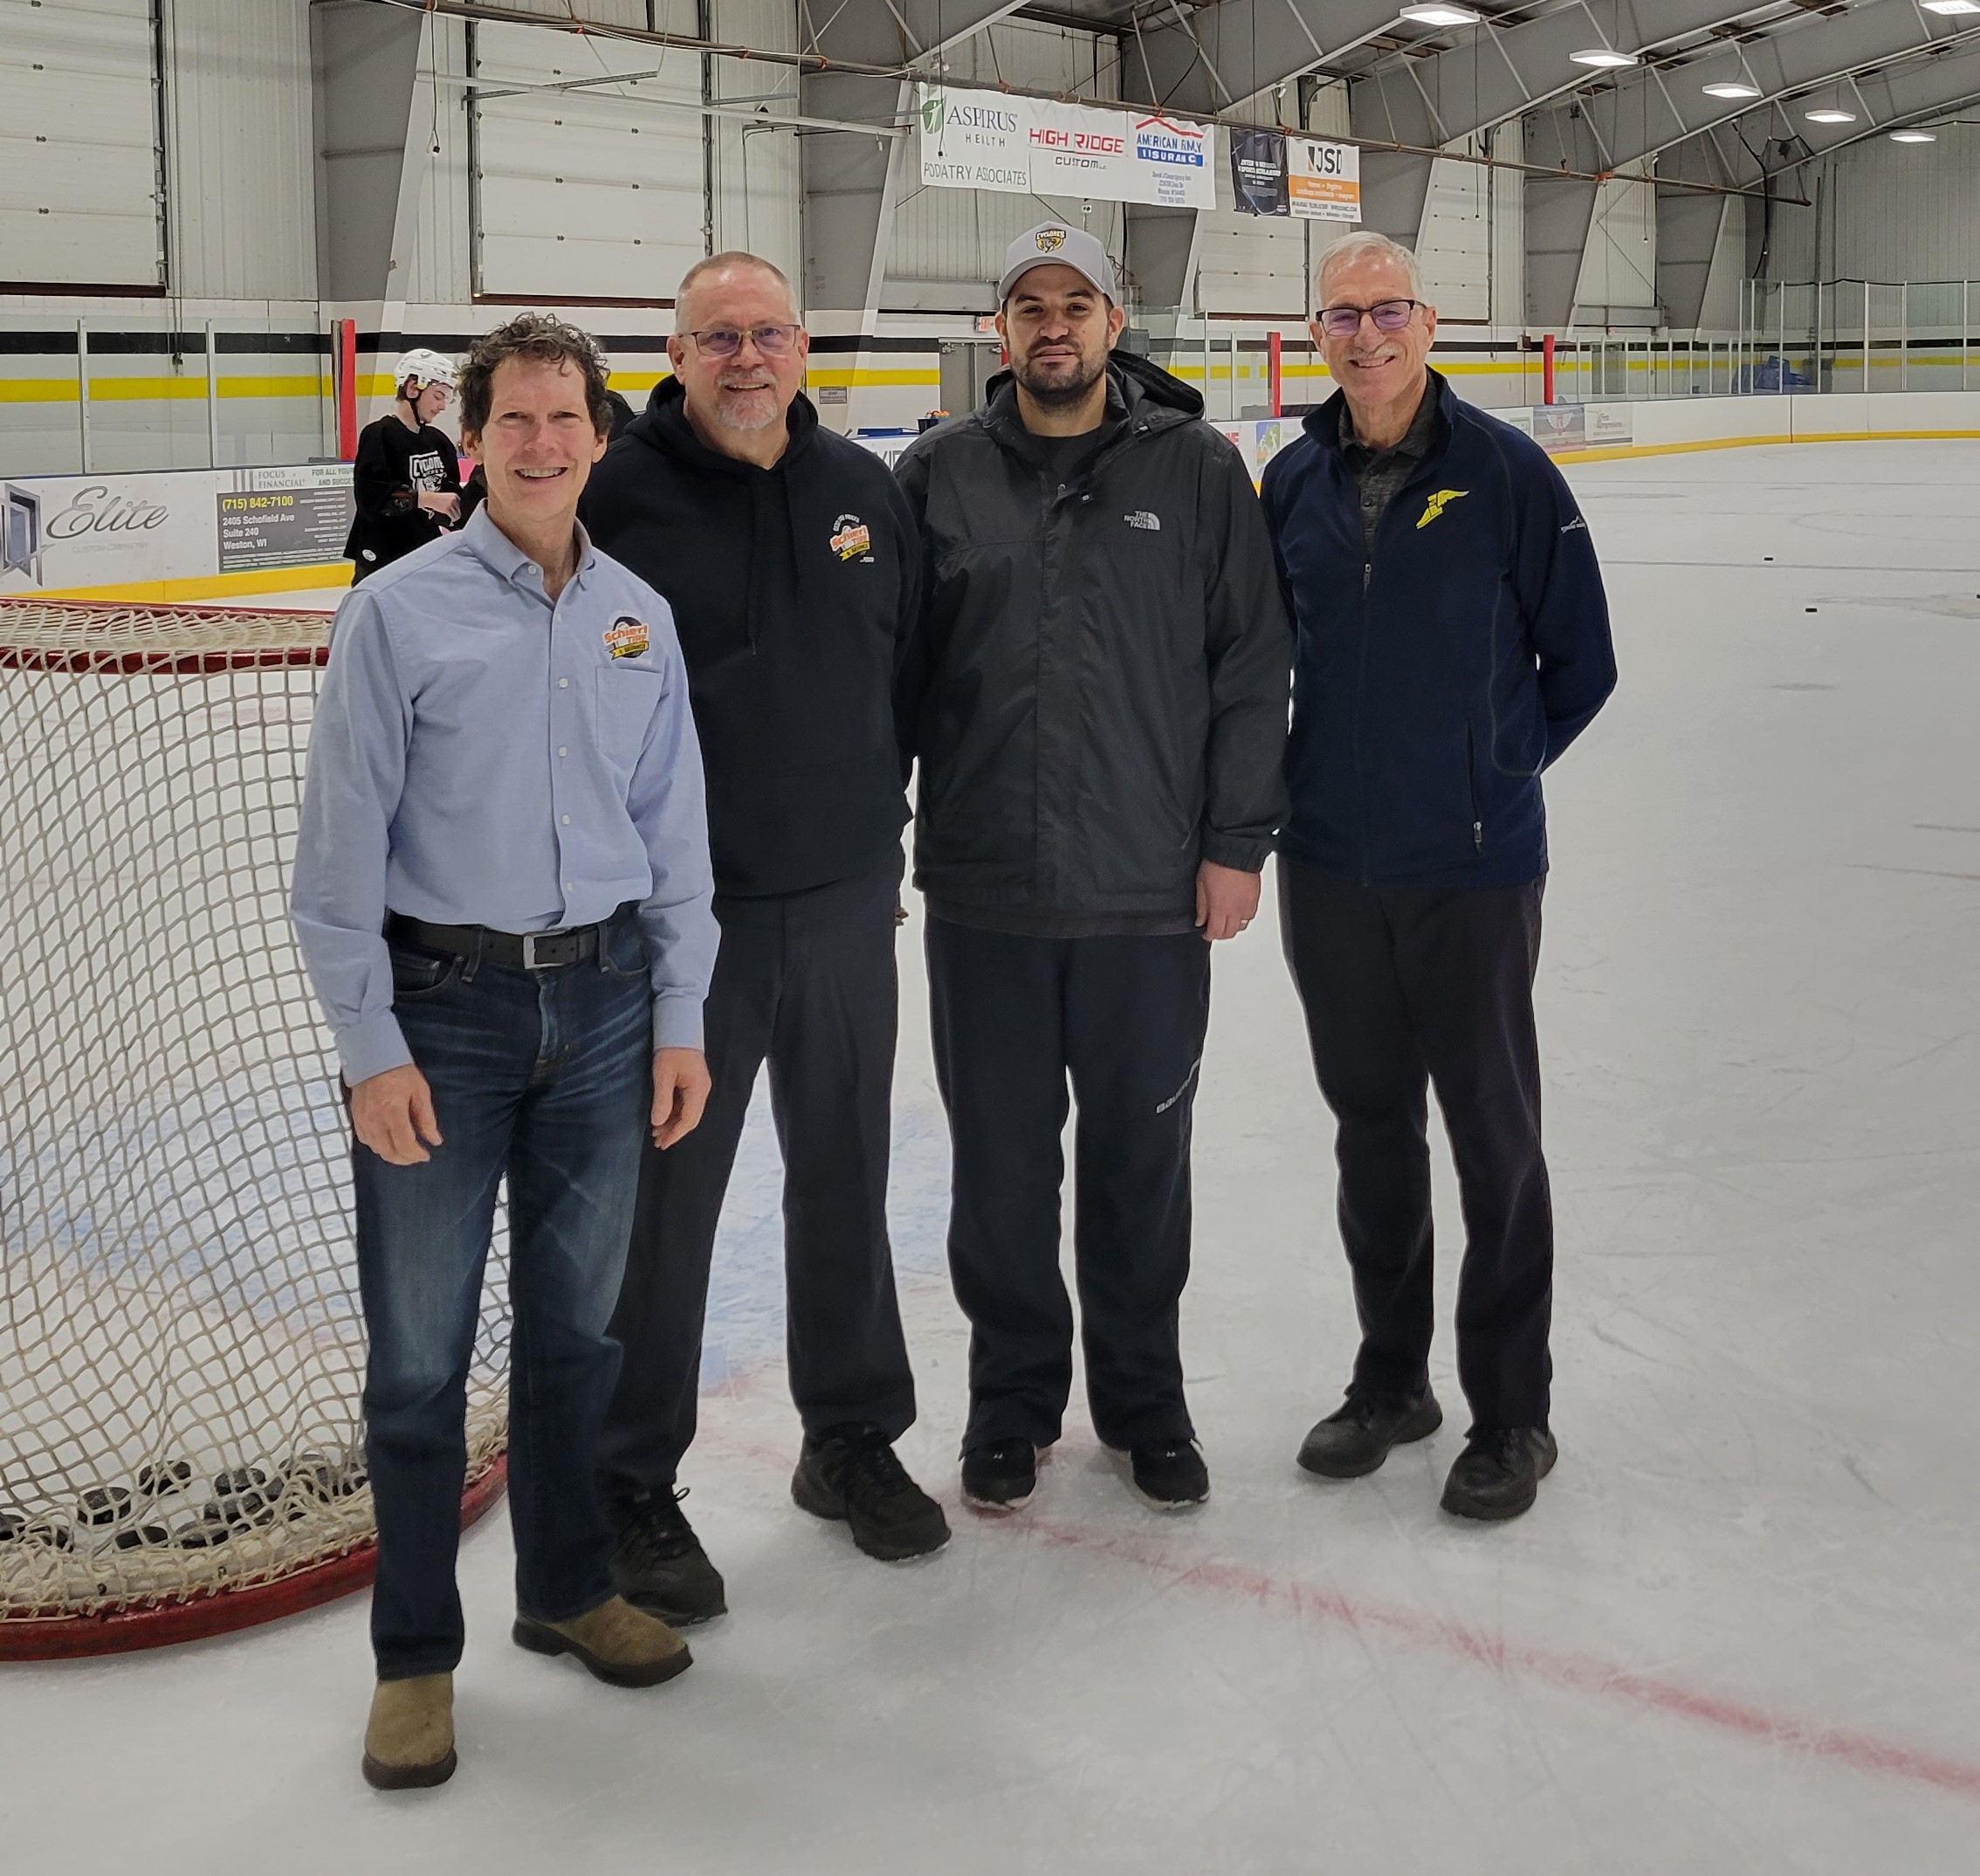 All About The Car Podcast Episode 60: Wausau Cyclones Hockey with Zach Serwe, Director of Business Operations 